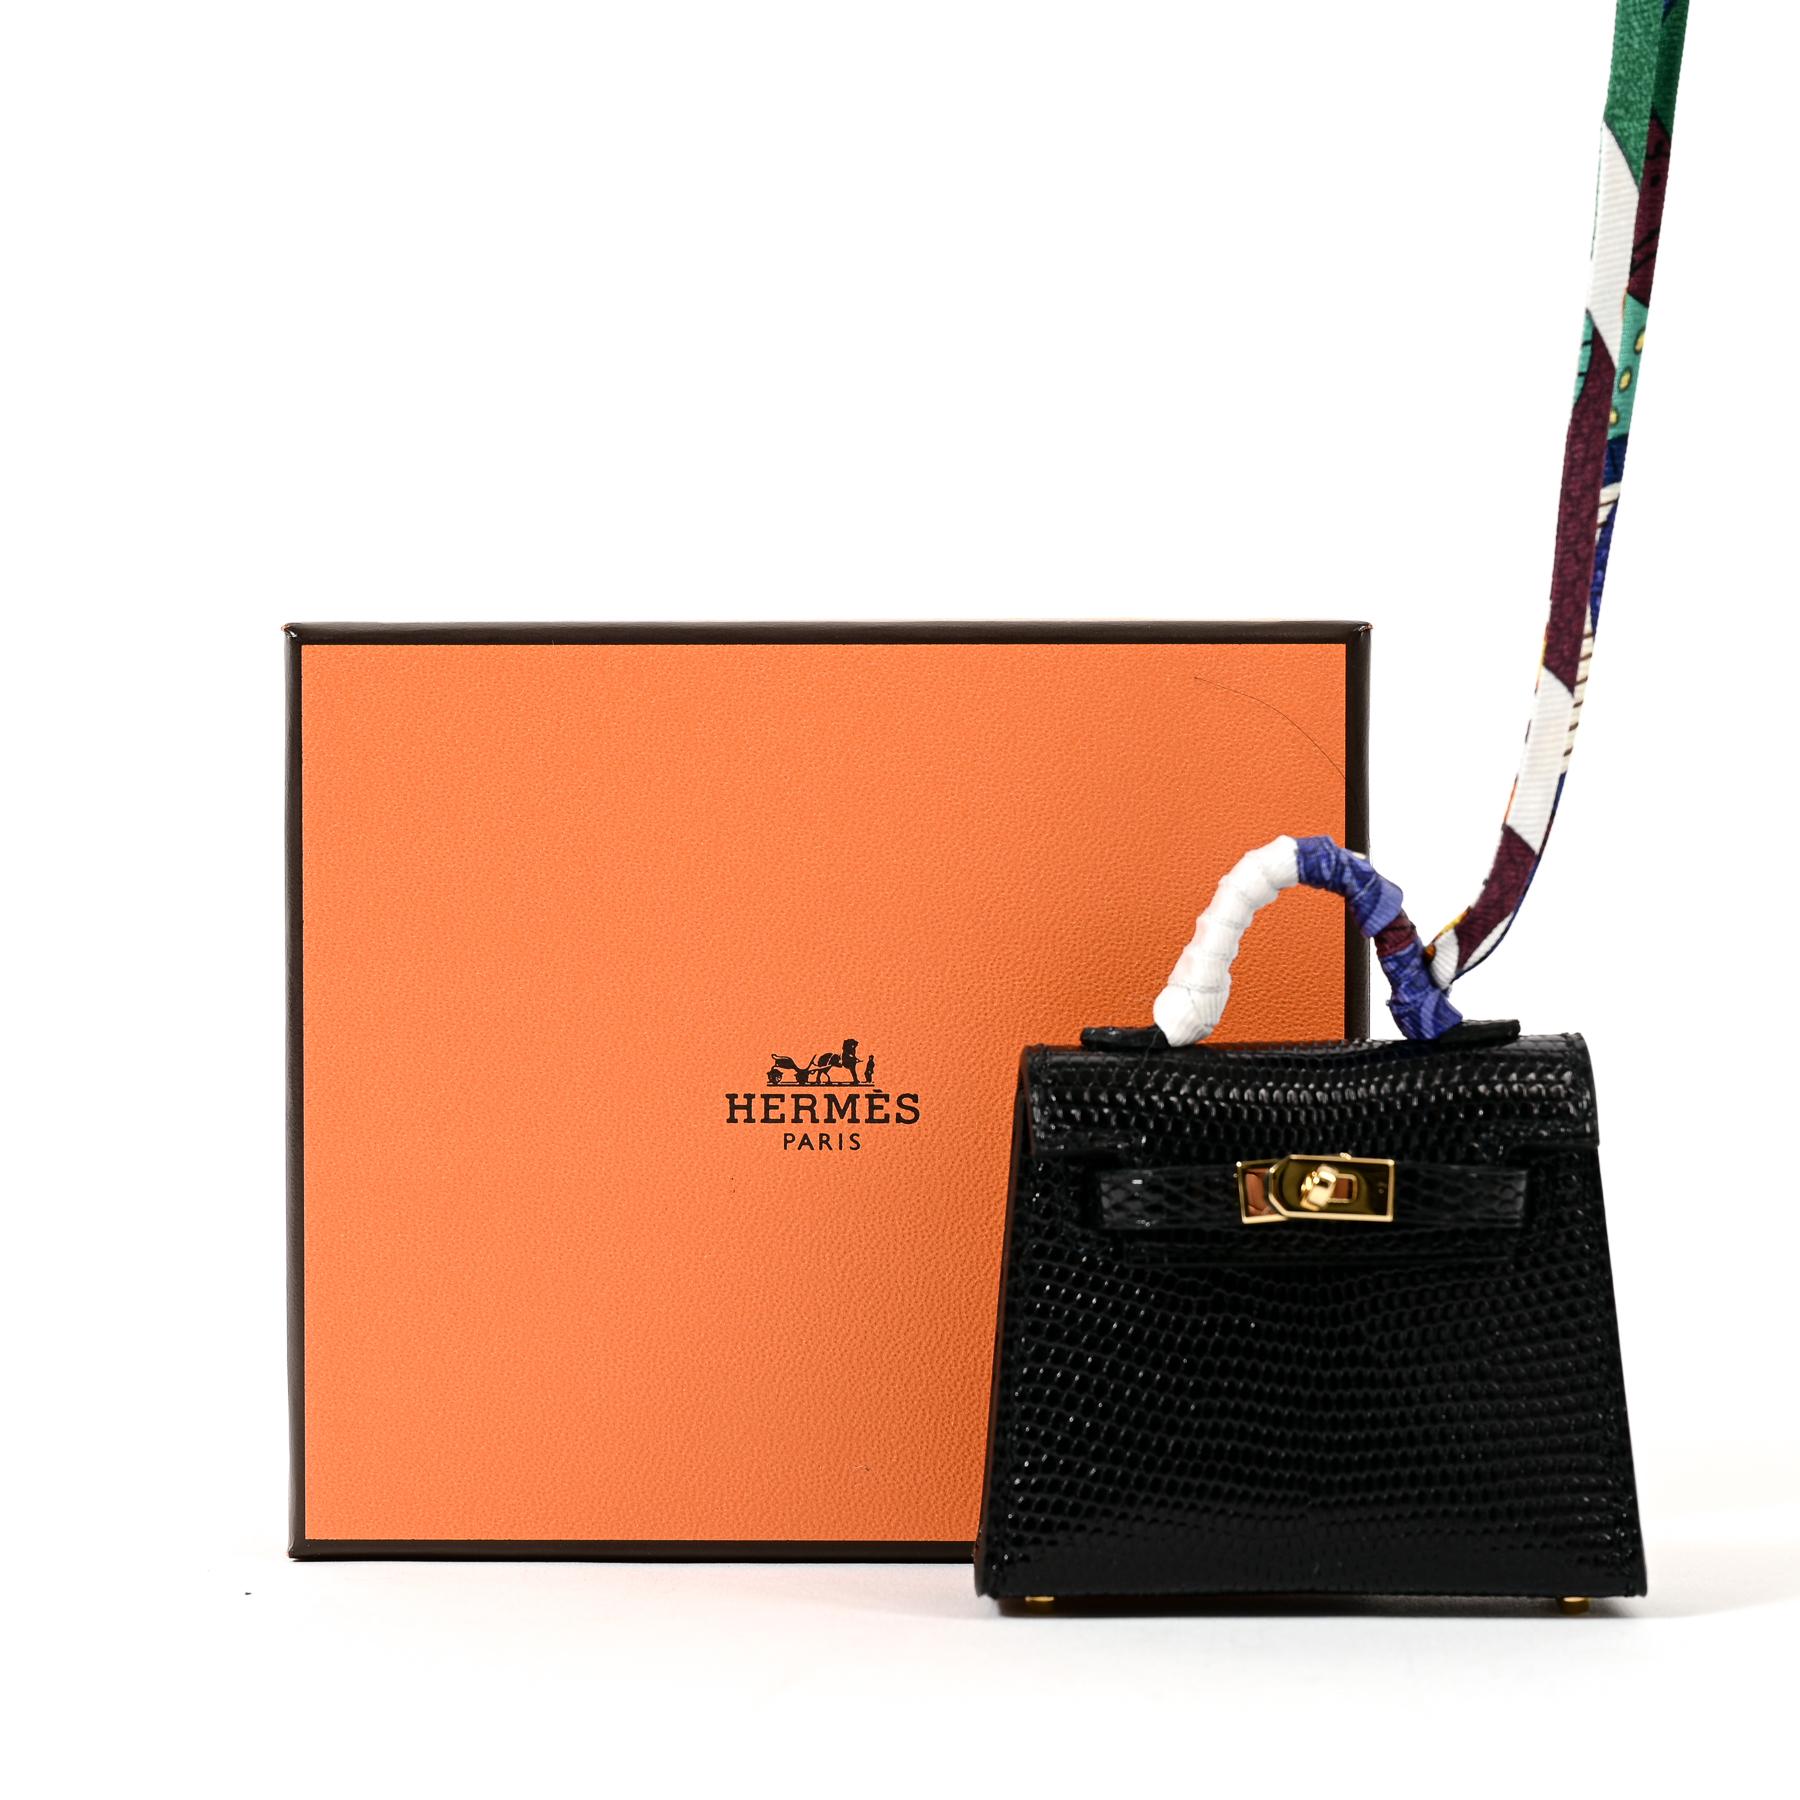 Hermès Micro Mini Kelly Twilly Charm Black Lizard GHW

Downsized from a Hermès Kelly bag, this adorable Hermès Kelly Twilly bag charm is crafted of luxurious shiny black lizard leather and features a twilly-wrapped top handle. The miniature micro